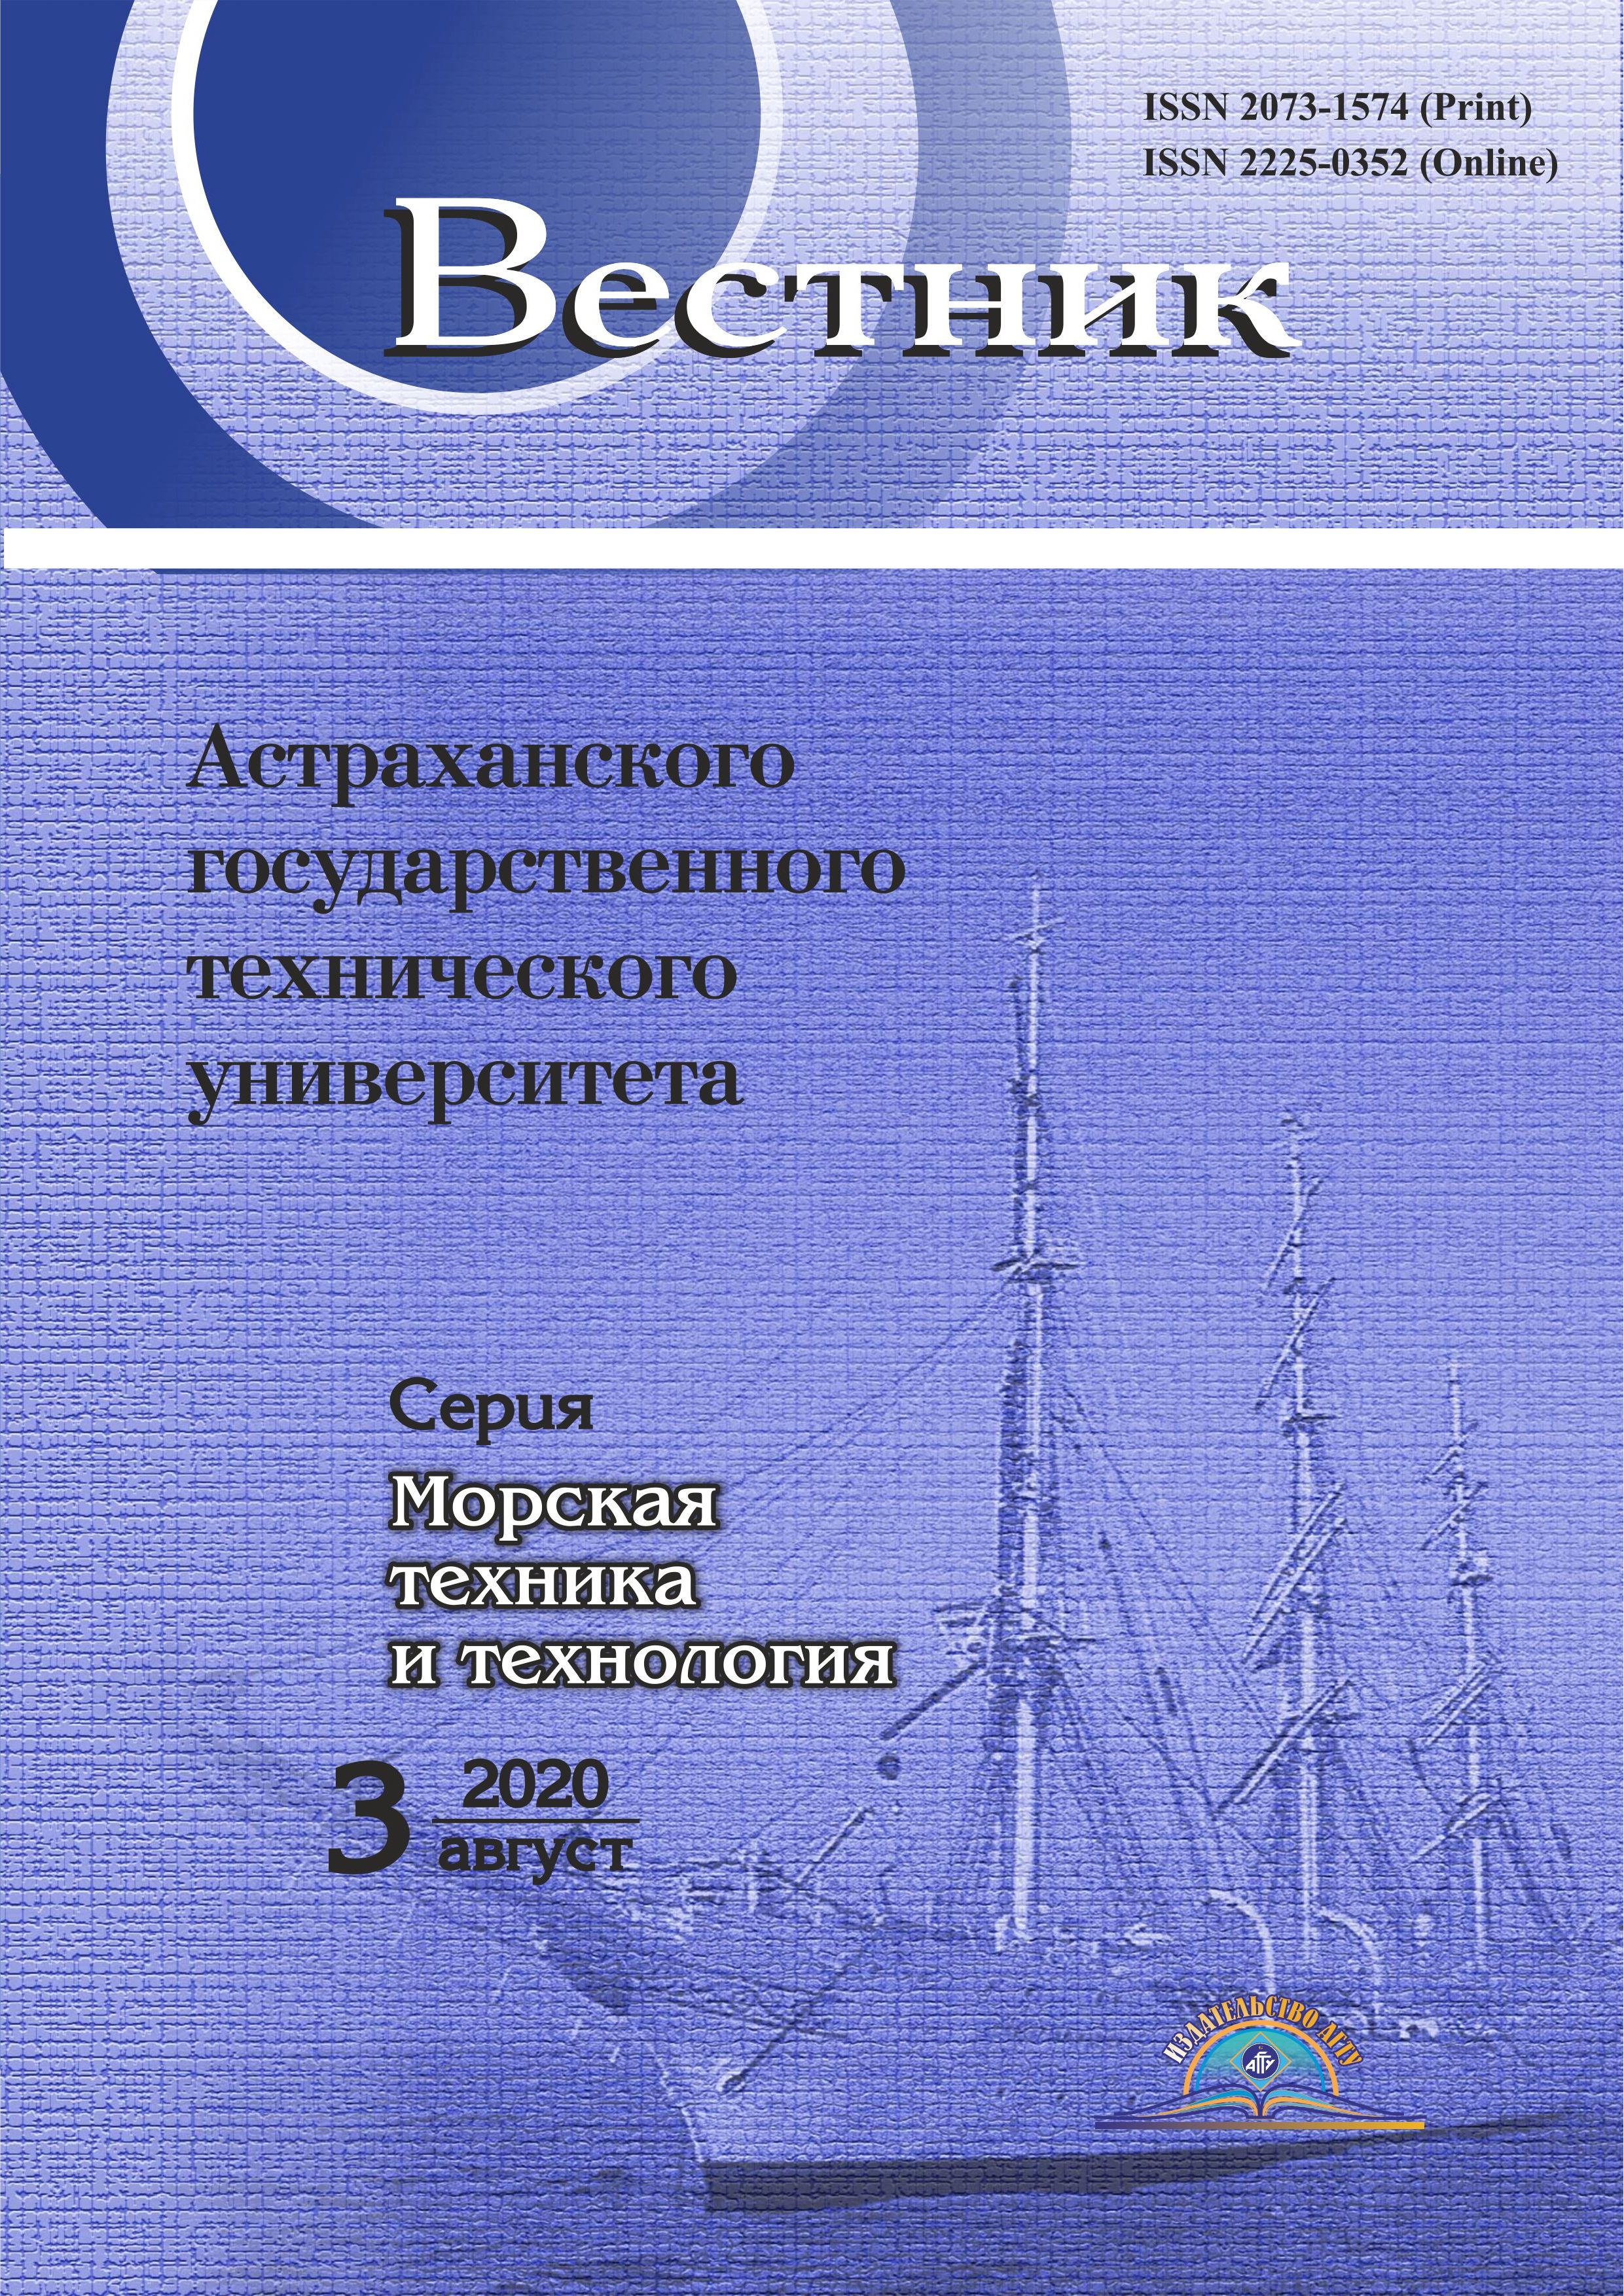                         Prospects of development of unmanned ships in Russian Federation
            